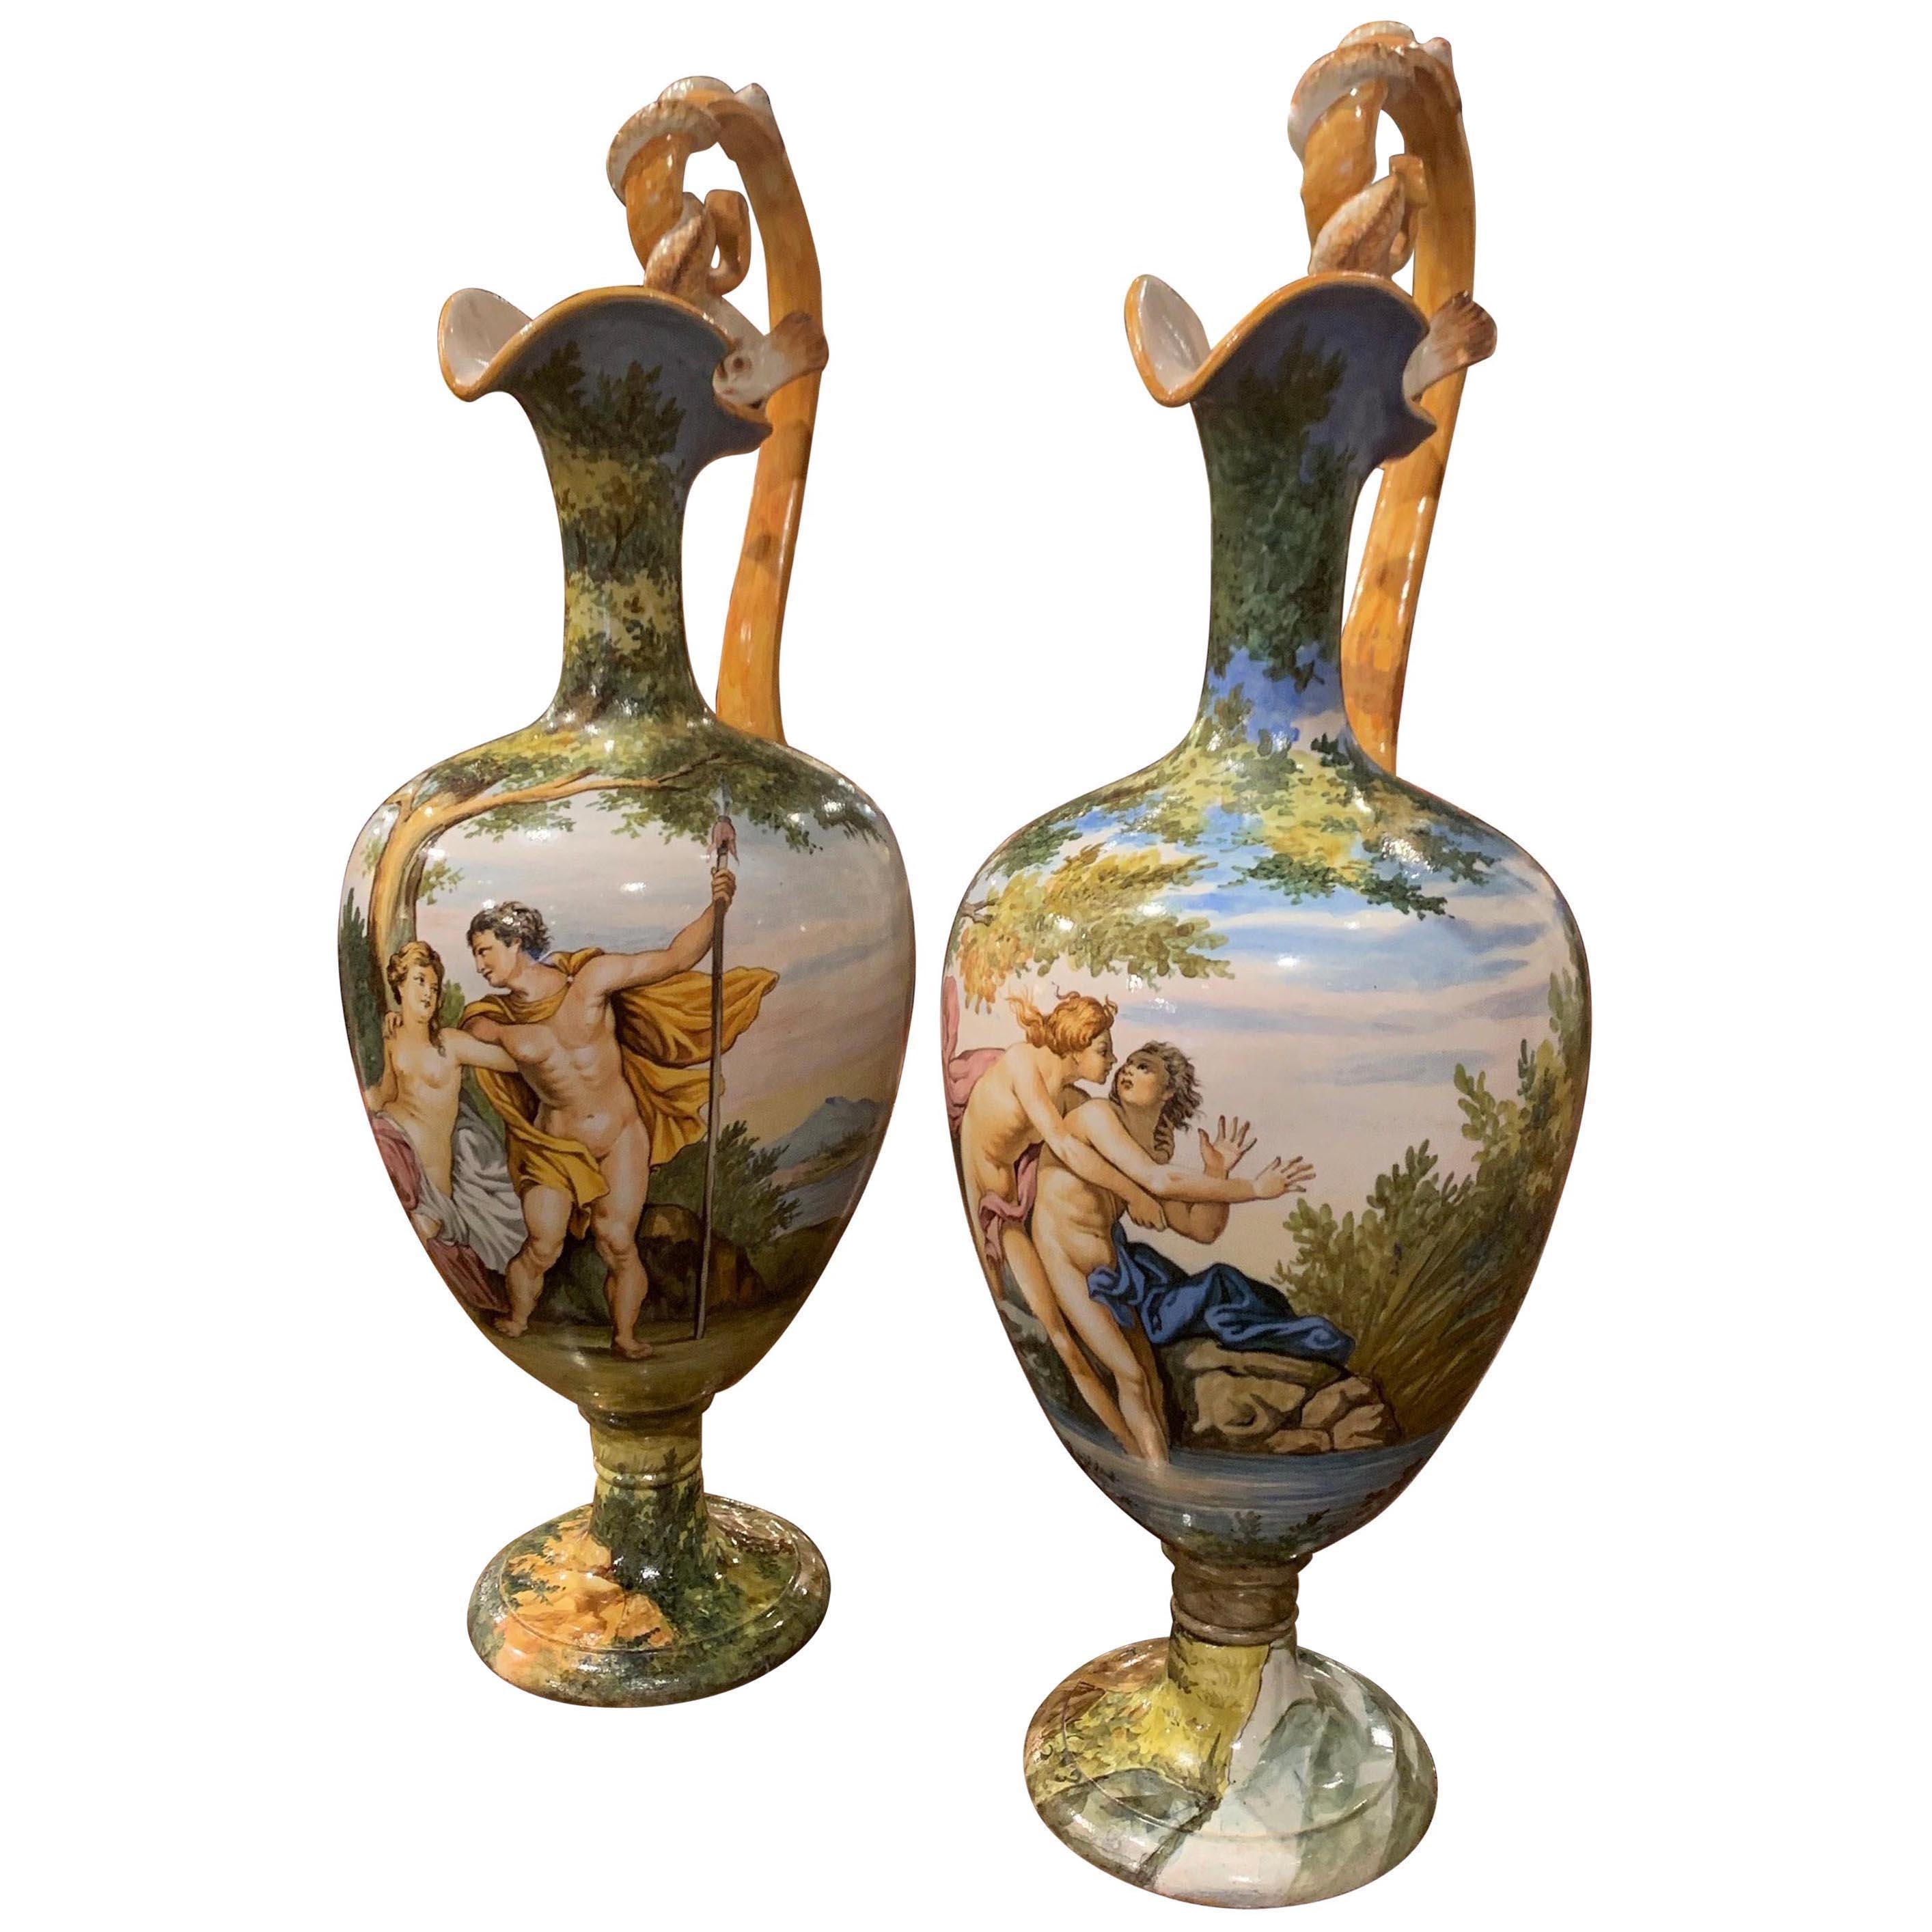 Pair of 19th Century Italian Carved Painted Ceramic Vases from Venice